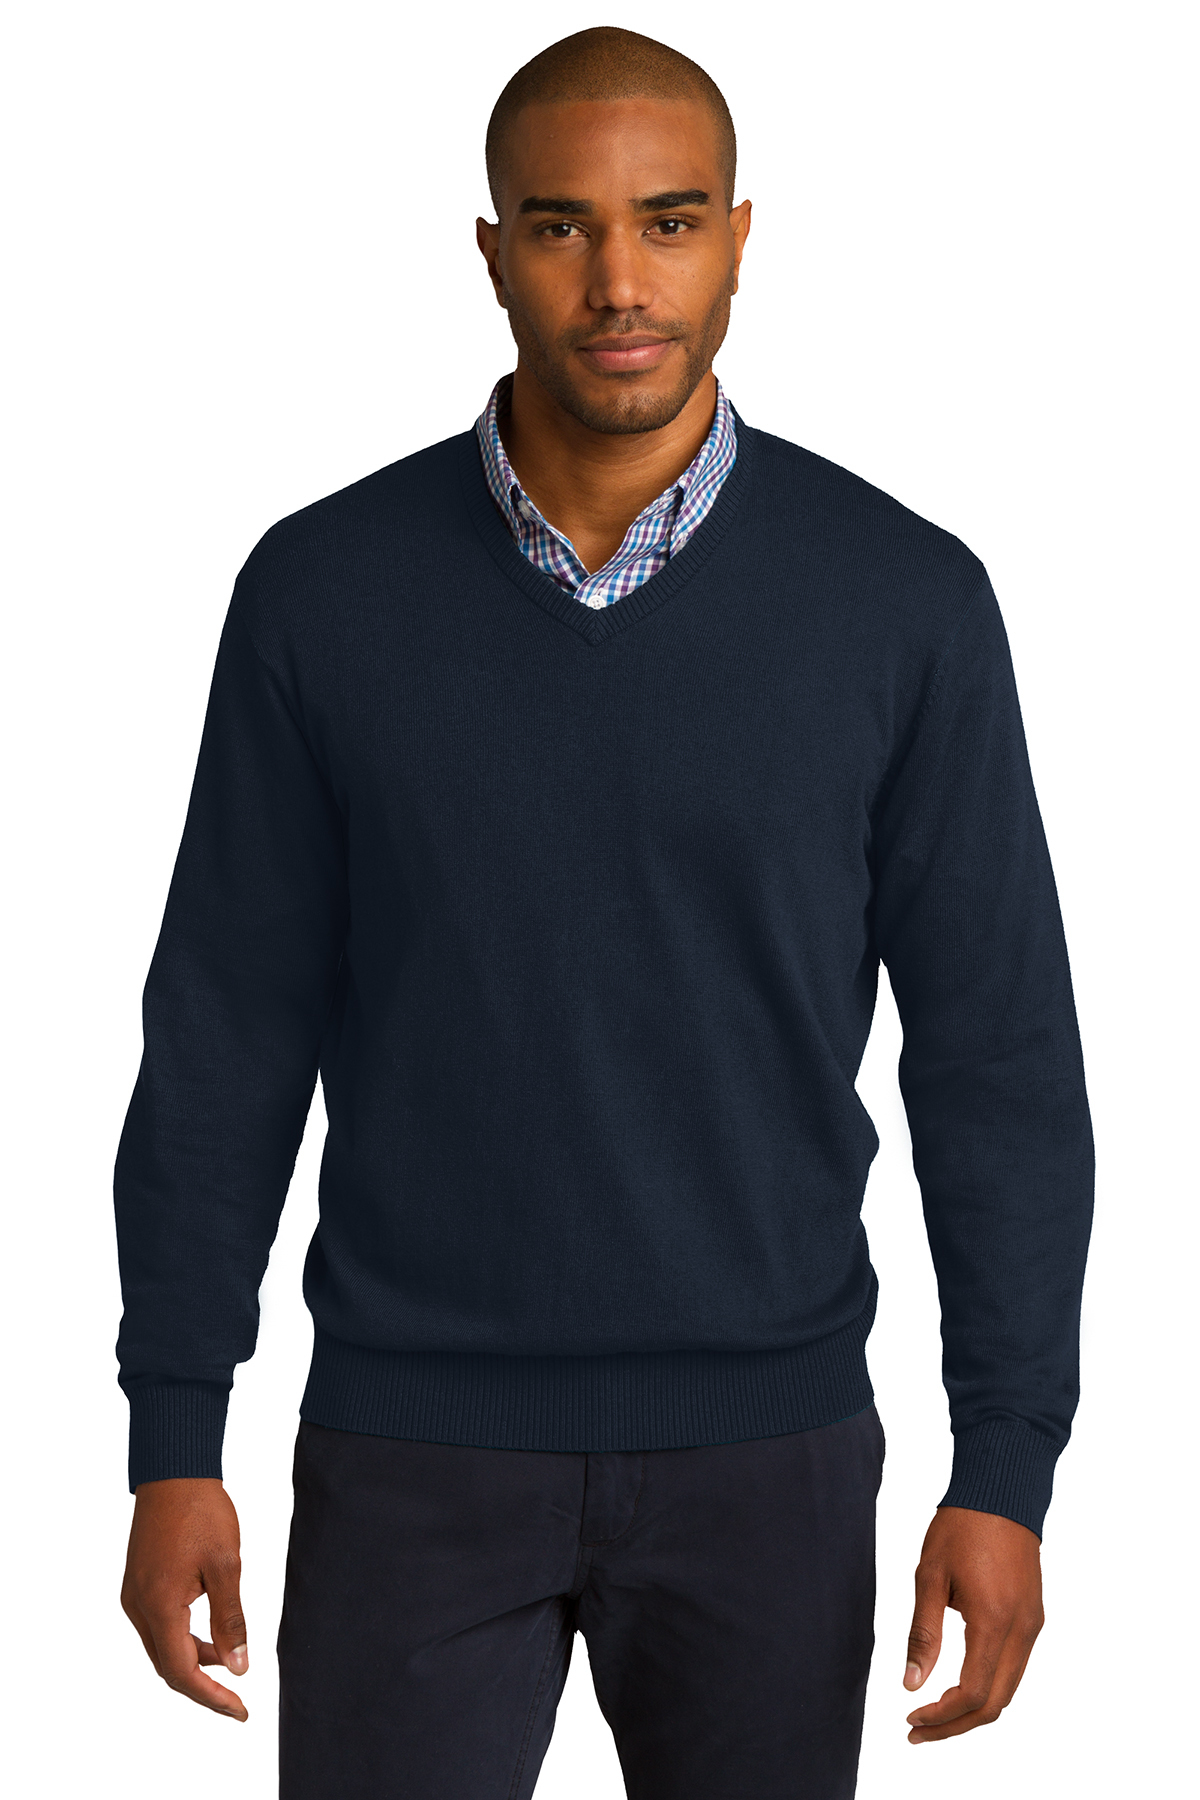 Port Authority V-Neck Sweater | Product | Company Casuals